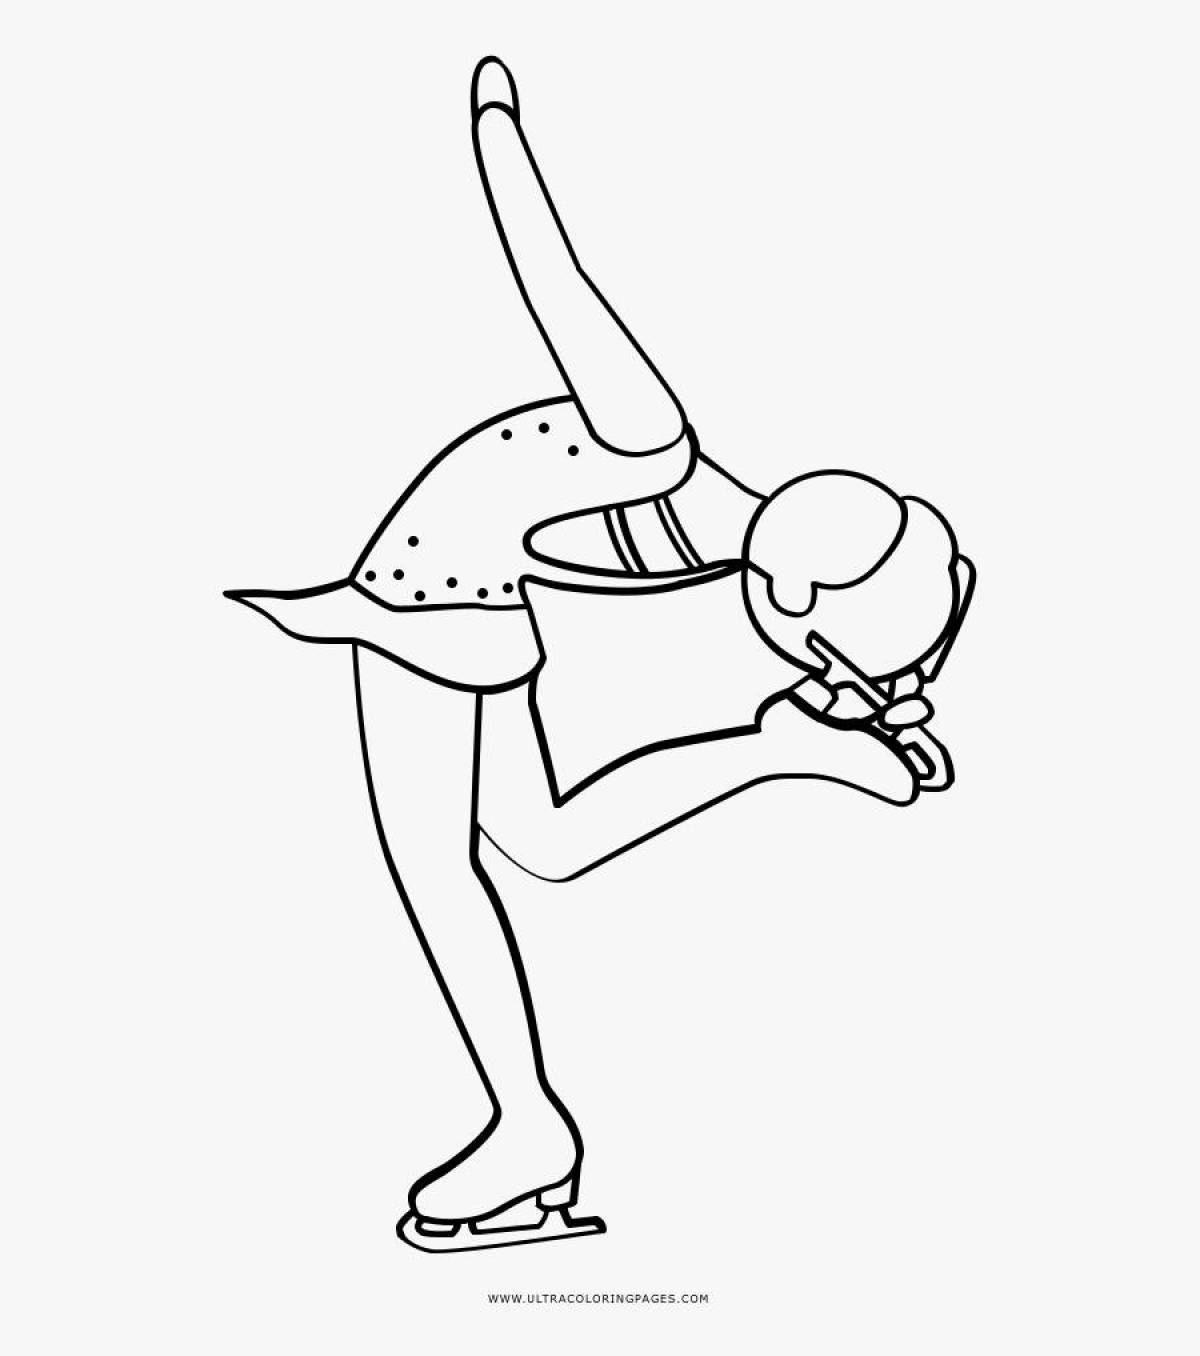 Awesome figure skating coloring page